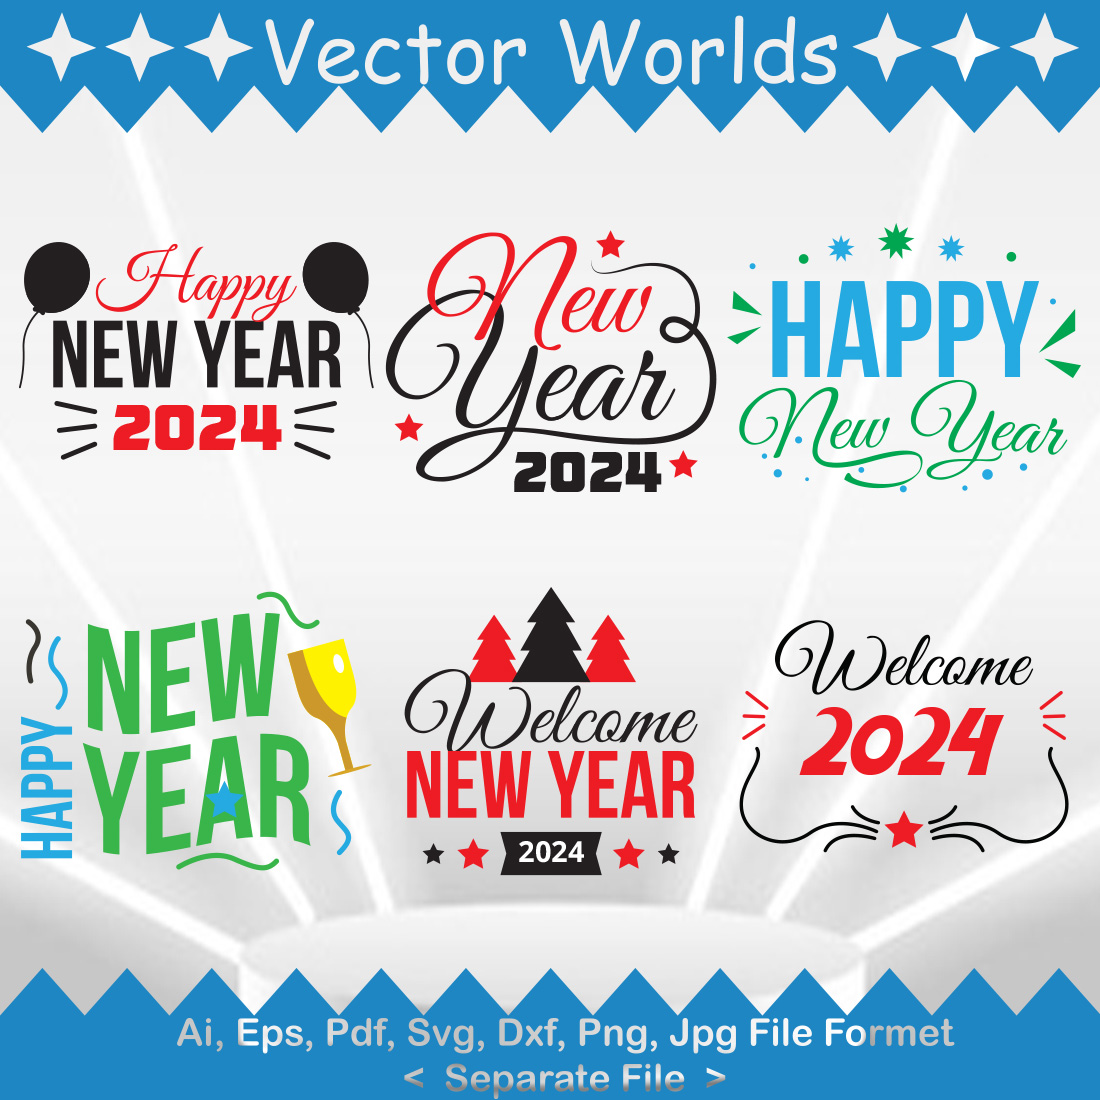 Exclusive decals Royalty Free Stock SVG Vector